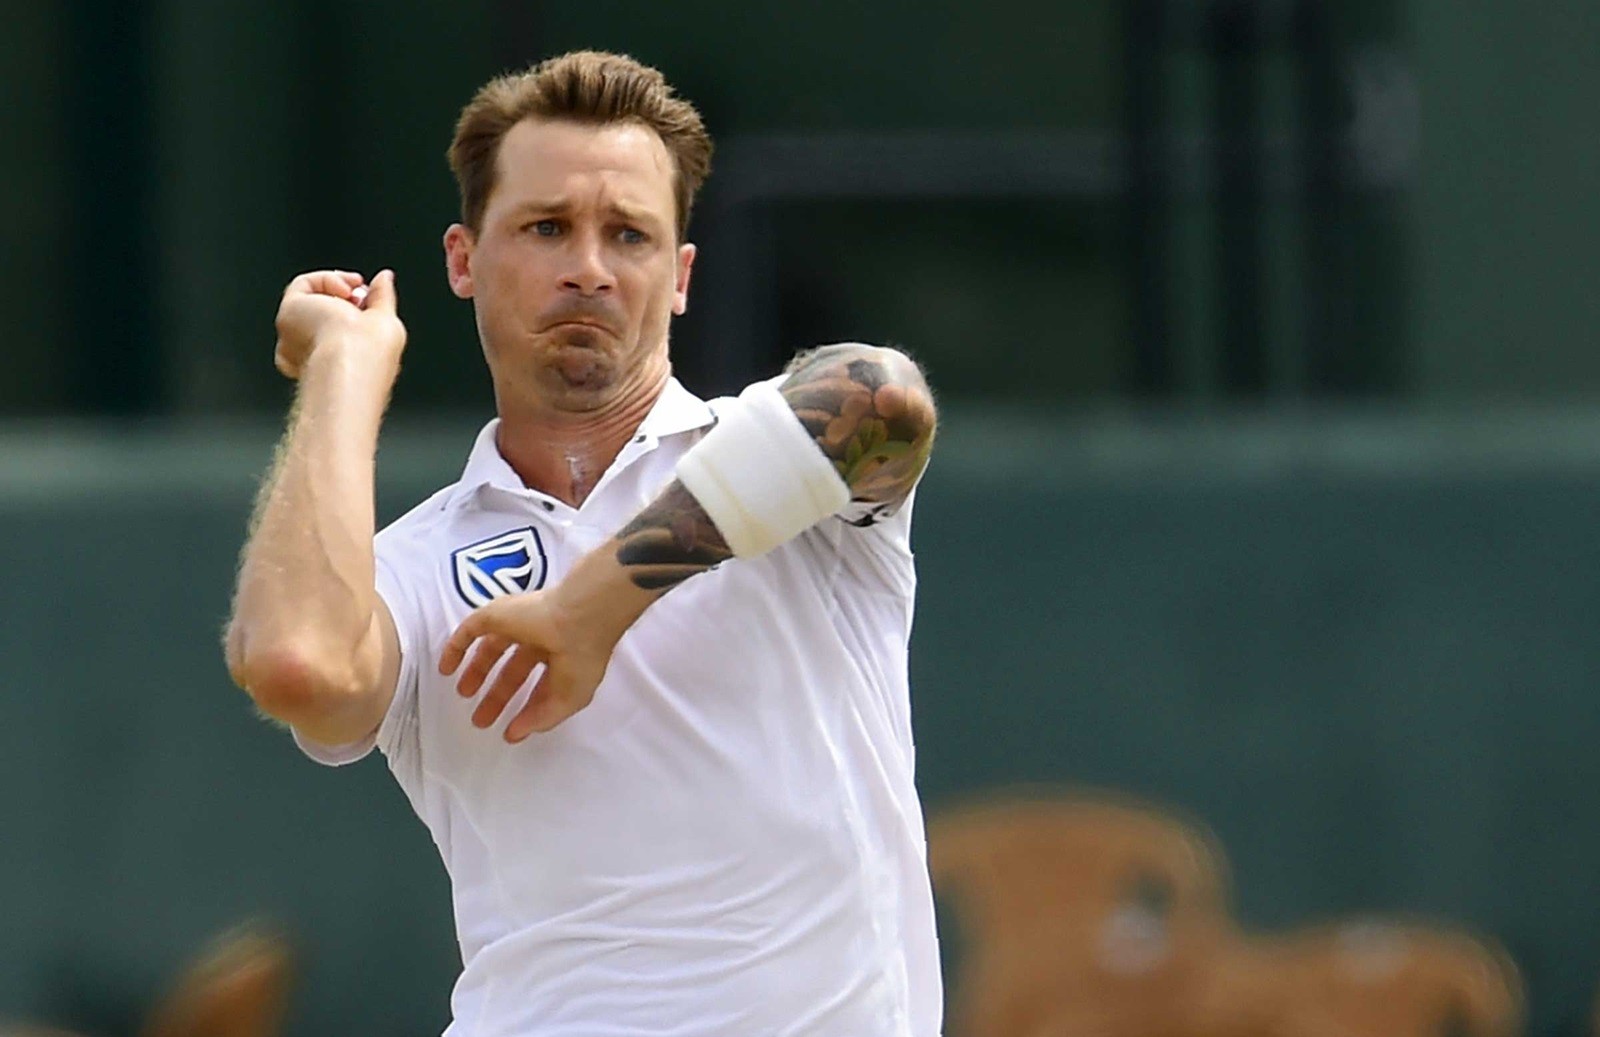 Dale Steyn apologizes for IPL remarks